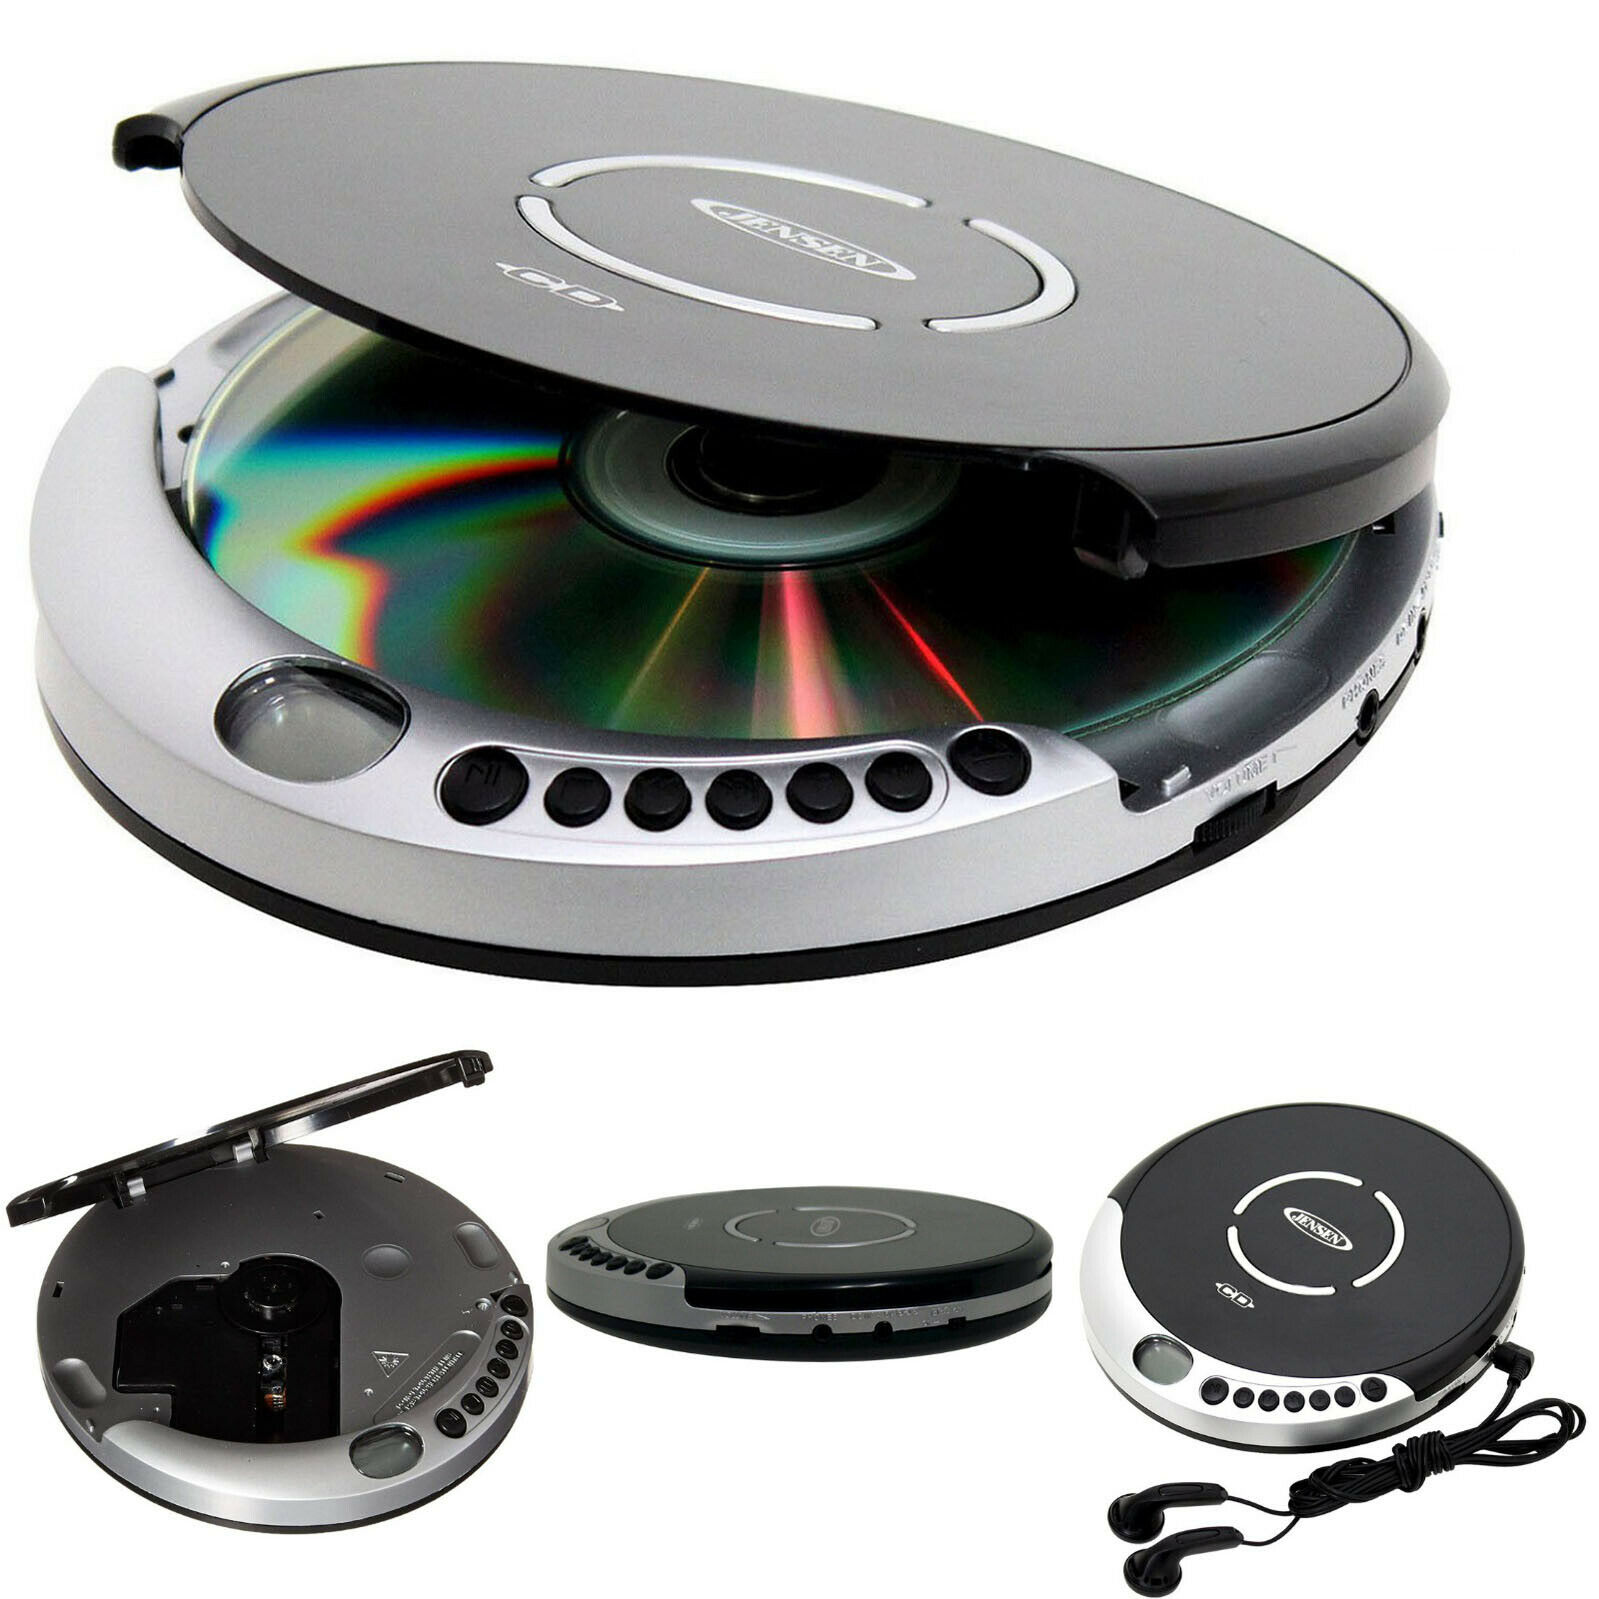 Cd Disk Player Portable With Cd-r/rw Anti-skip Protection Bass Boost